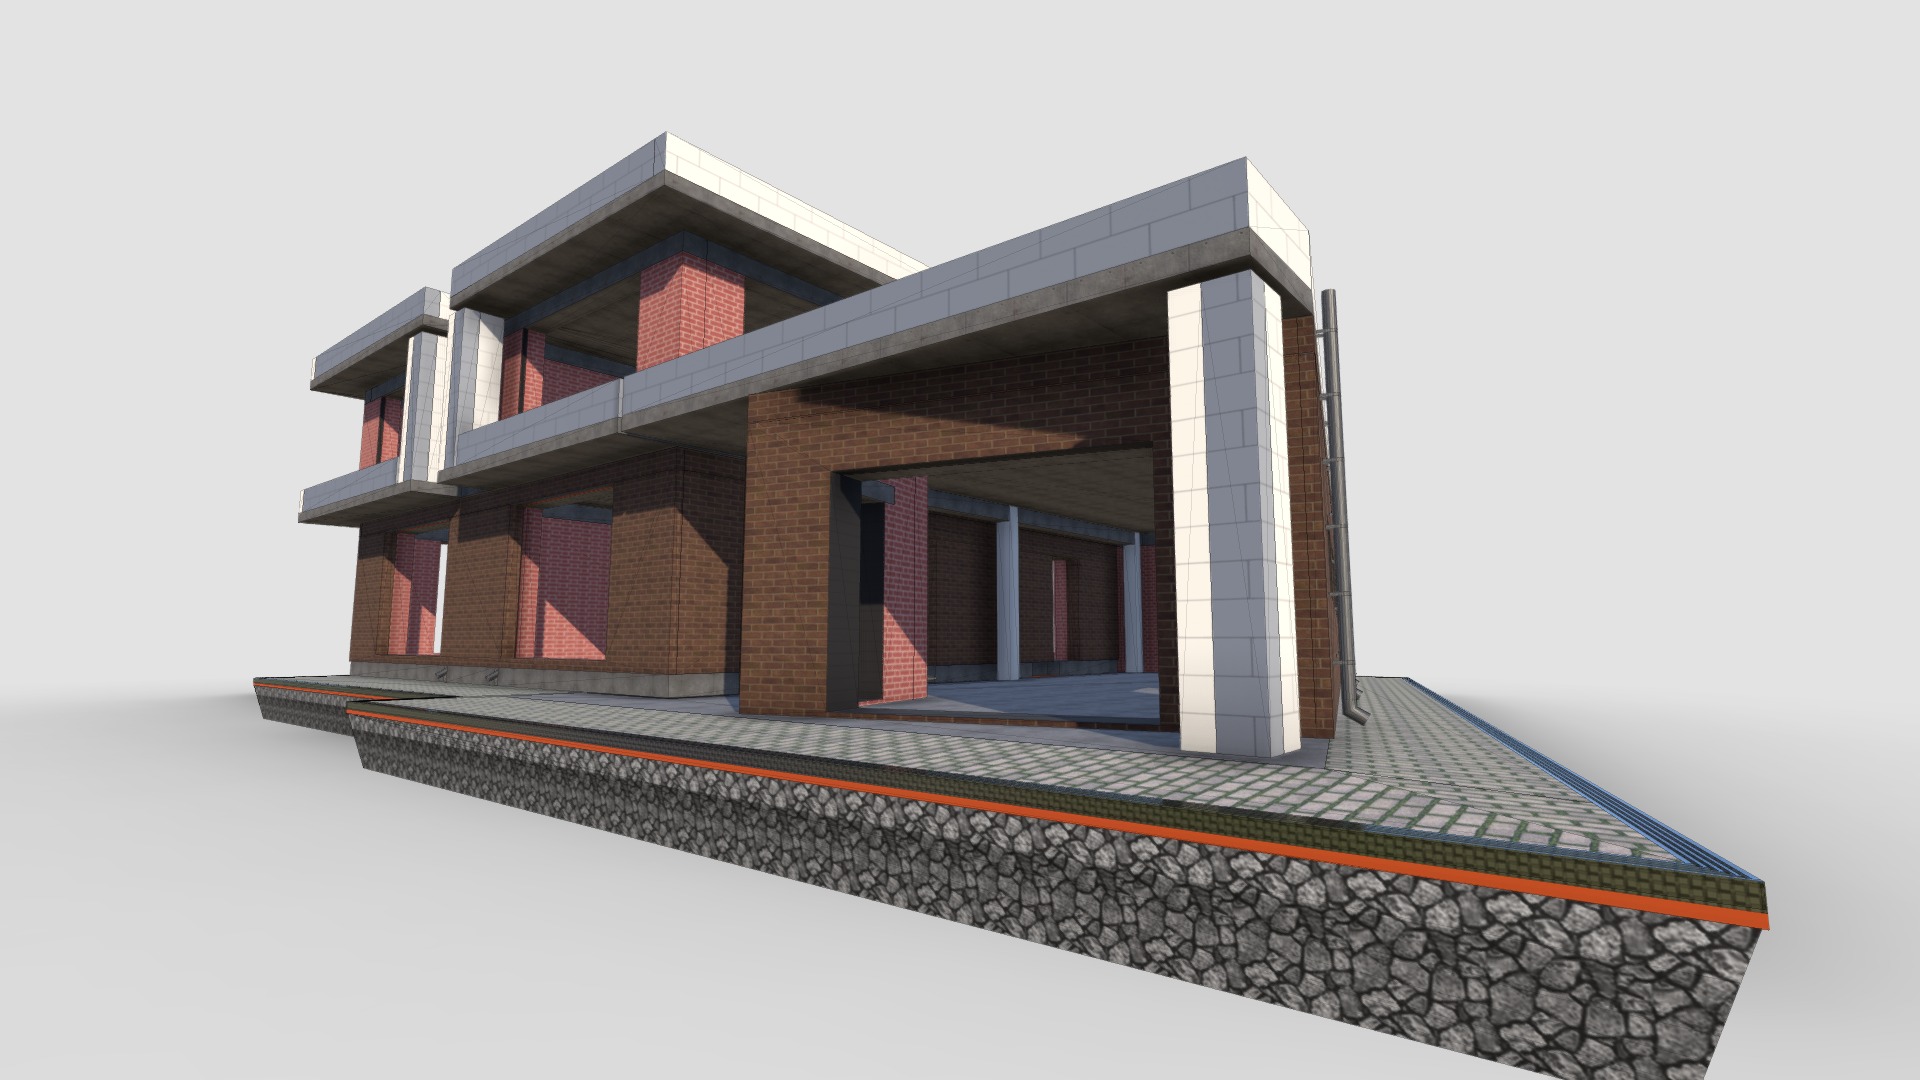 3D model Construction – Loading - This is a 3D model of the Construction - Loading. The 3D model is about a house with a roof.